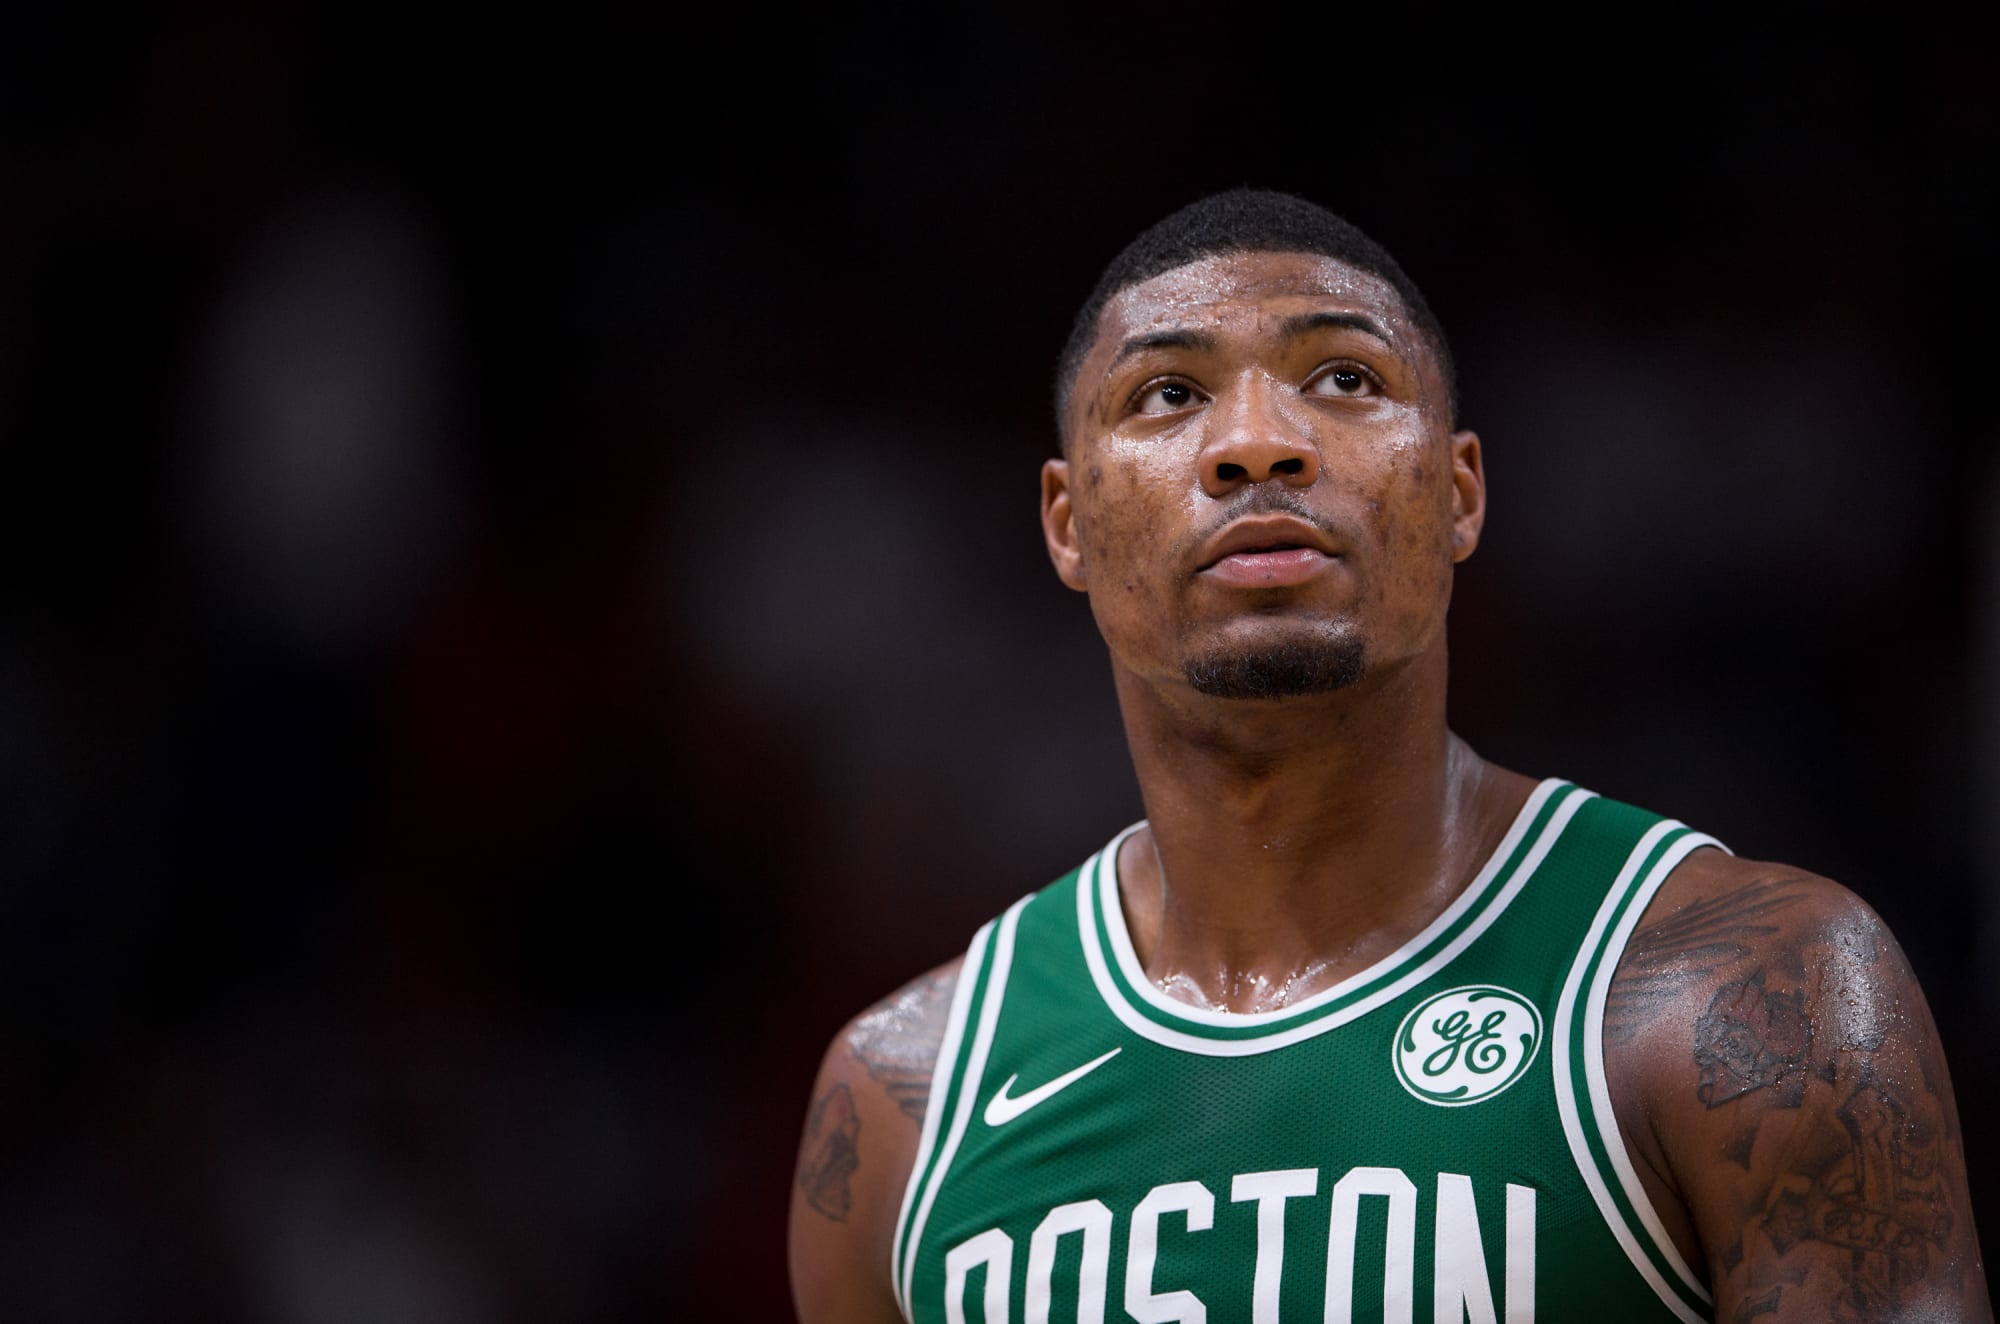 The Curious Case of Marcus Smart